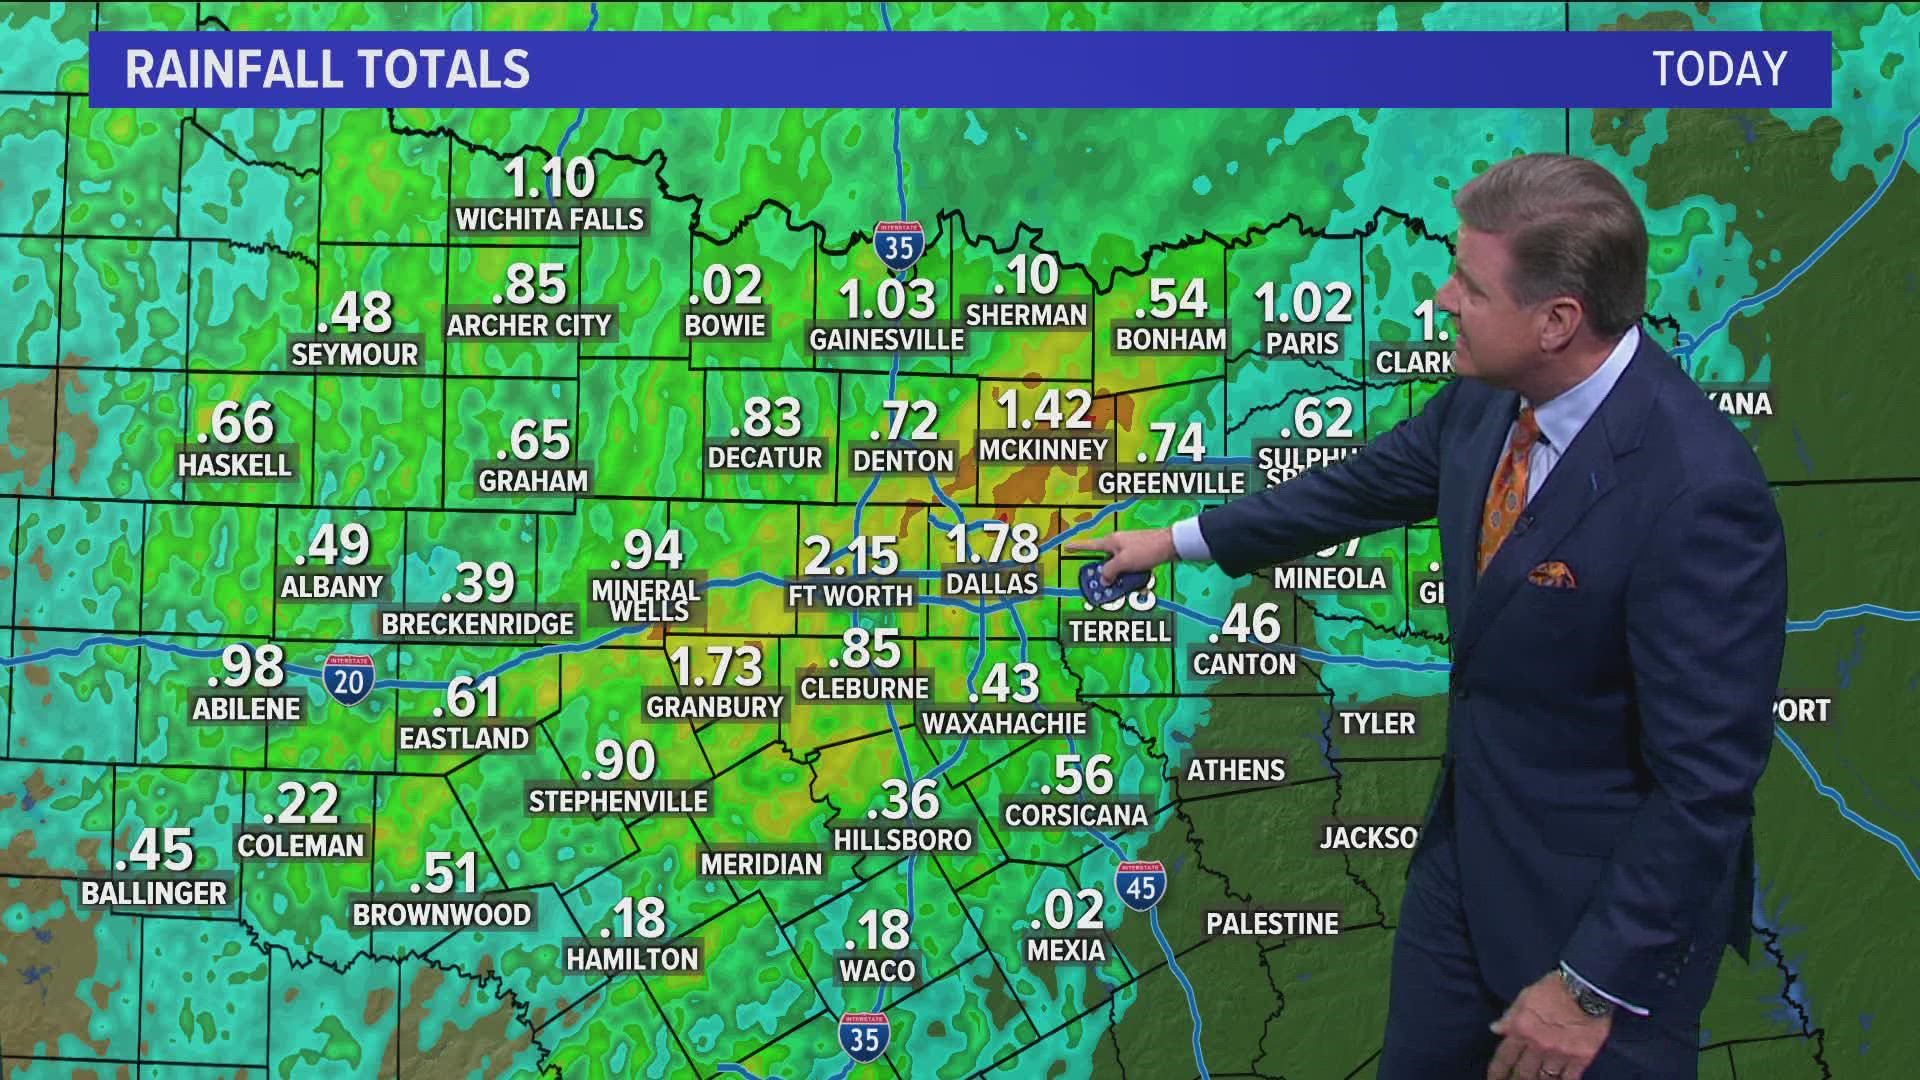 The heavy rain was welcomed in North Texas on Monday. Cooler temperatures also arrived. Here's the latest.